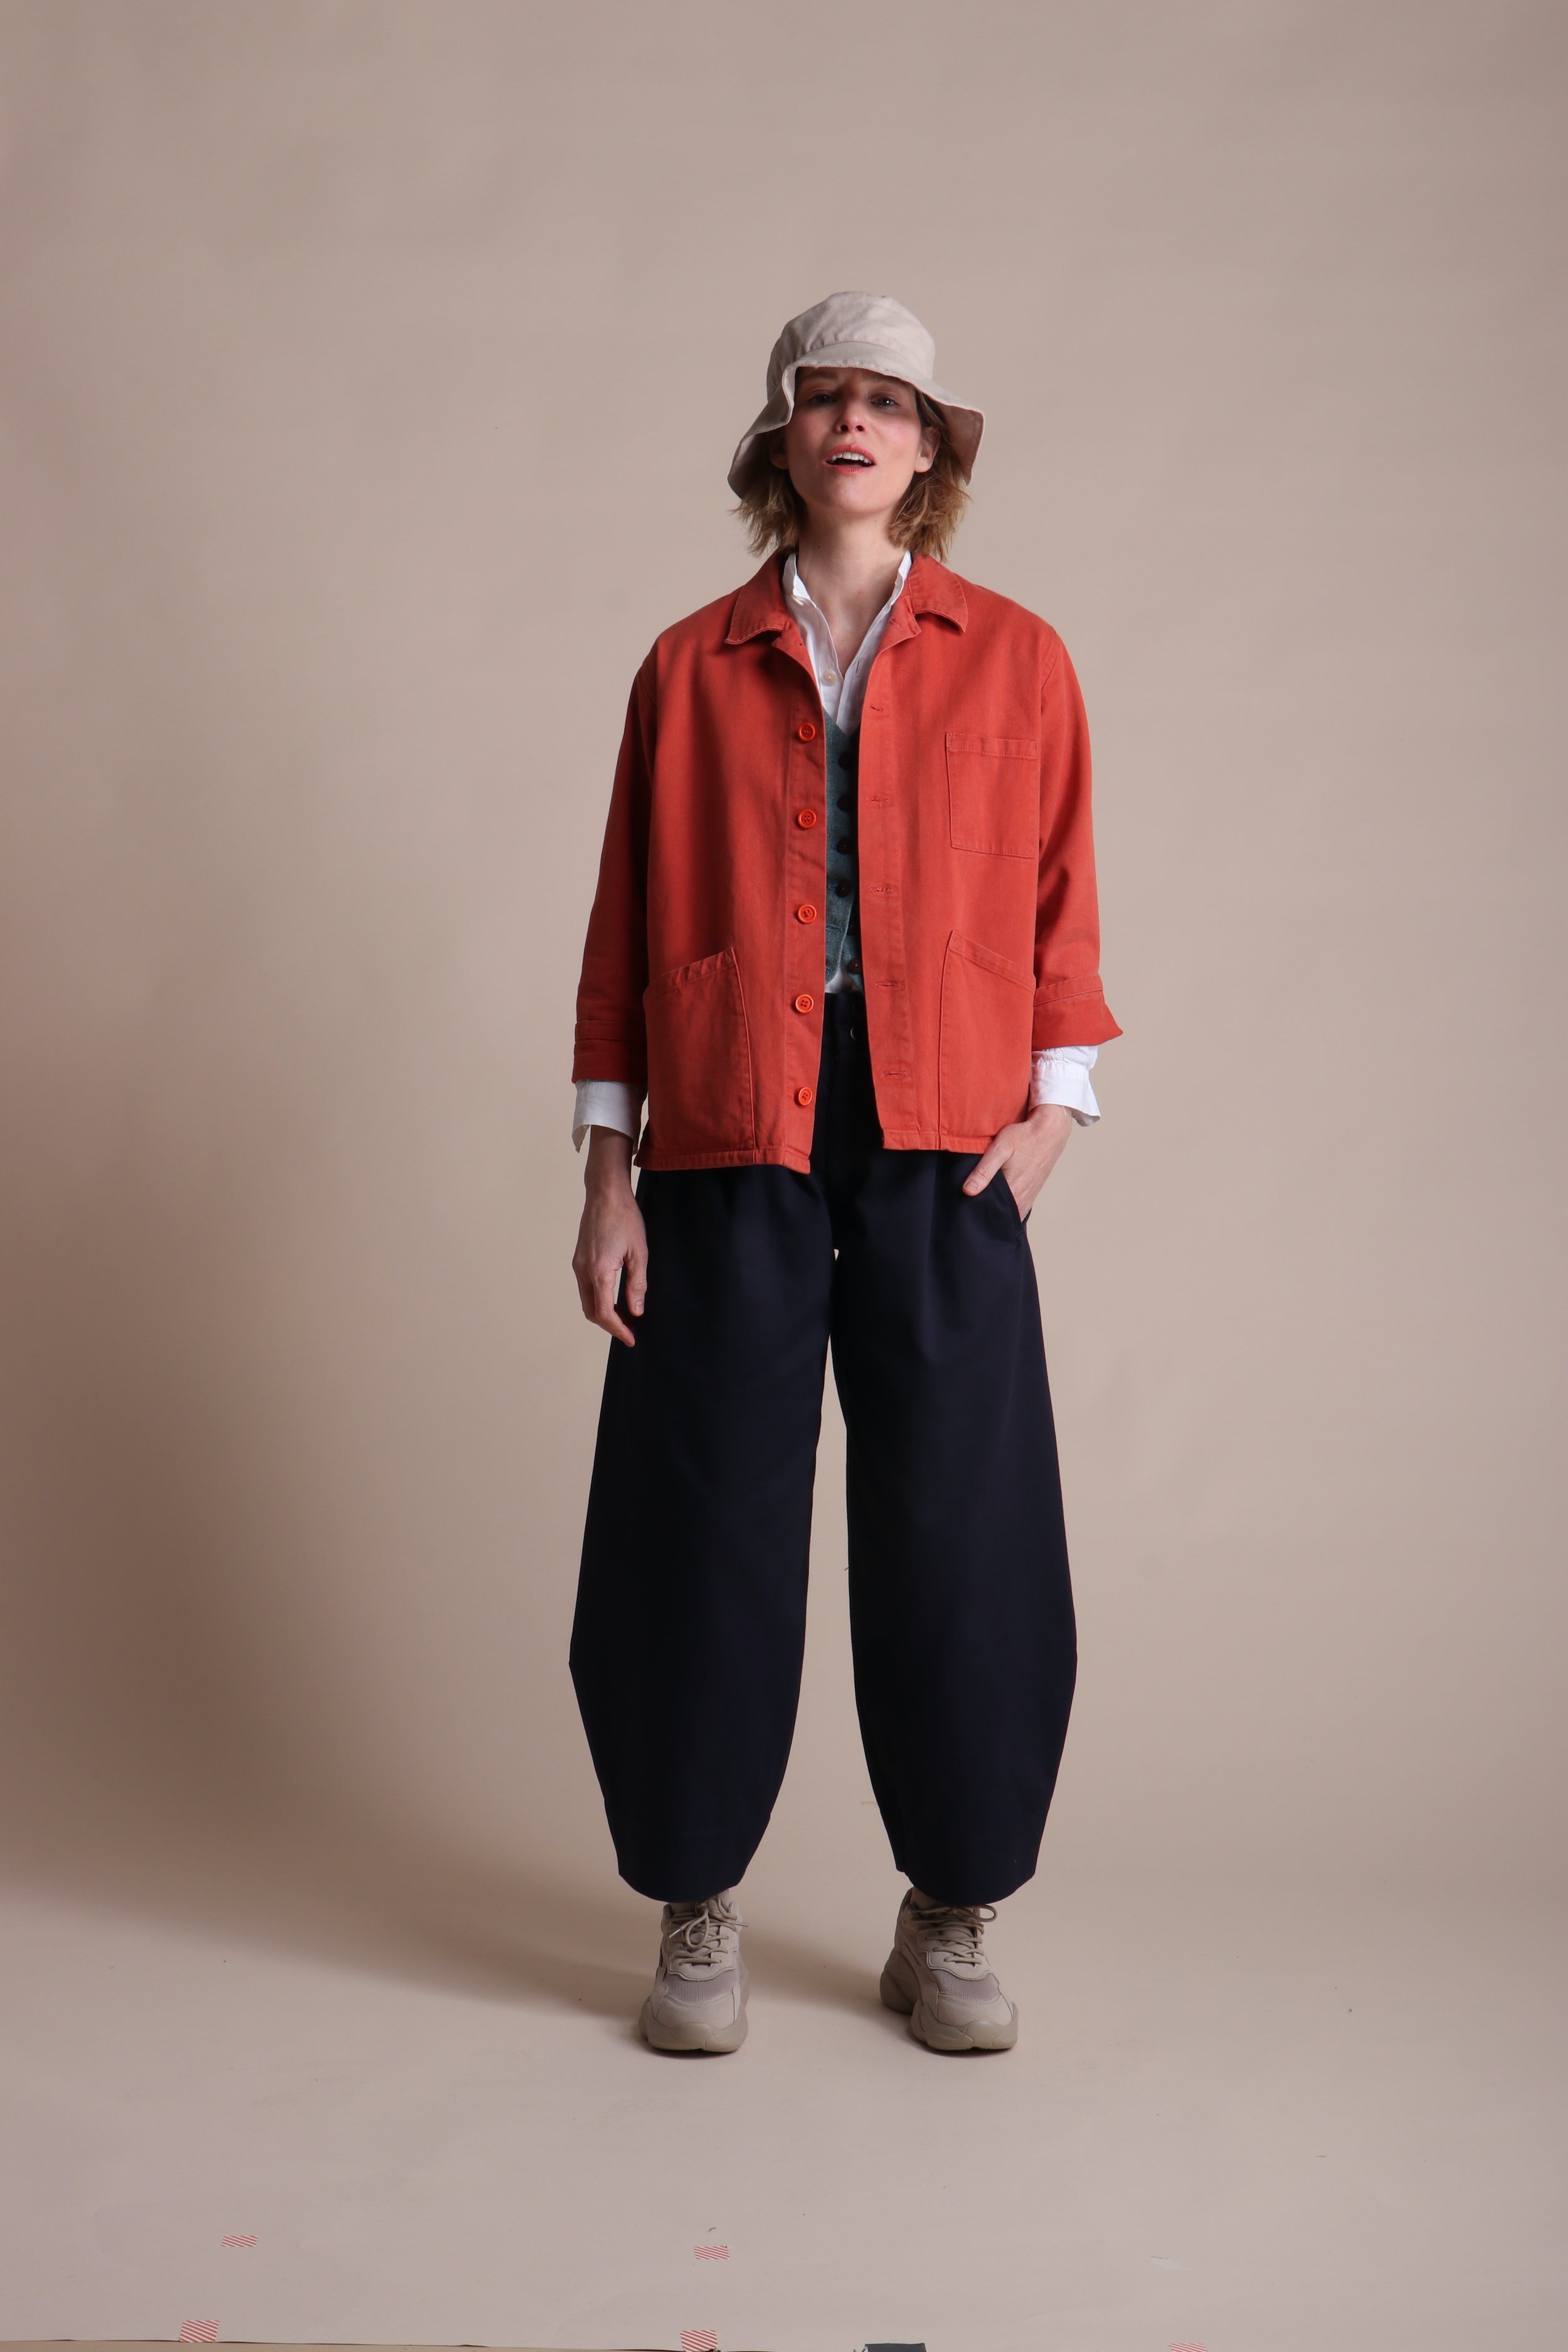 Woman wearing Carrier Company Dutch trouser In Navy Cotton Drill, Orange Norfolk Work Jacket and Cotton Sun Hat